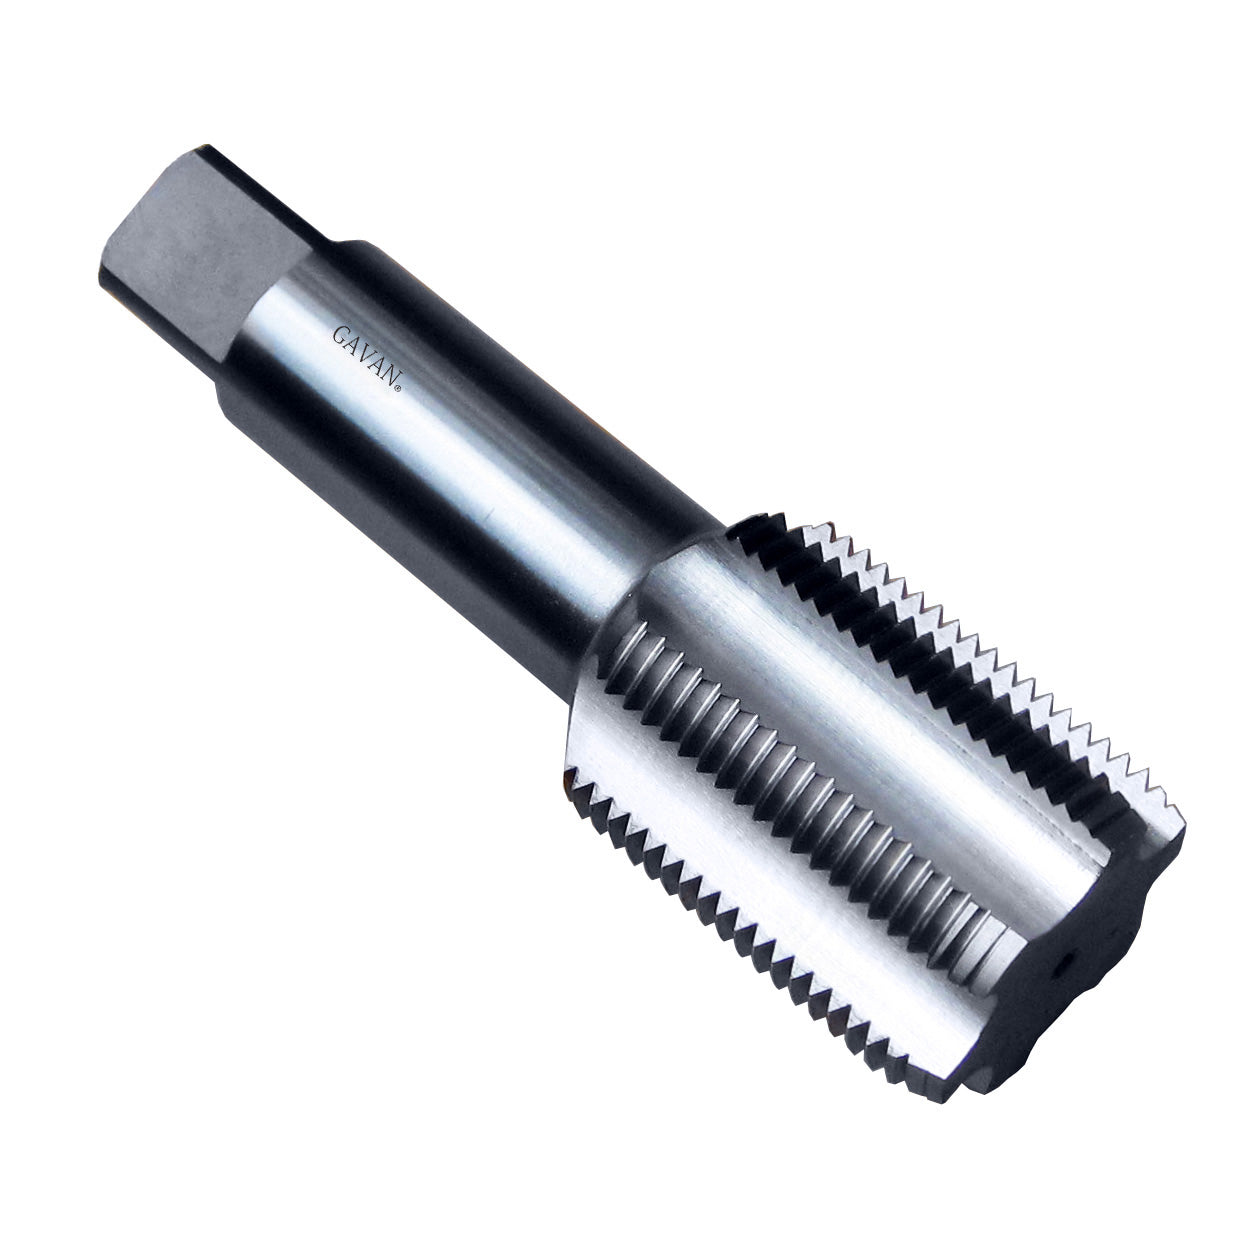 1 7/8" - 6 HSS Unified Right Hand Thread Tap